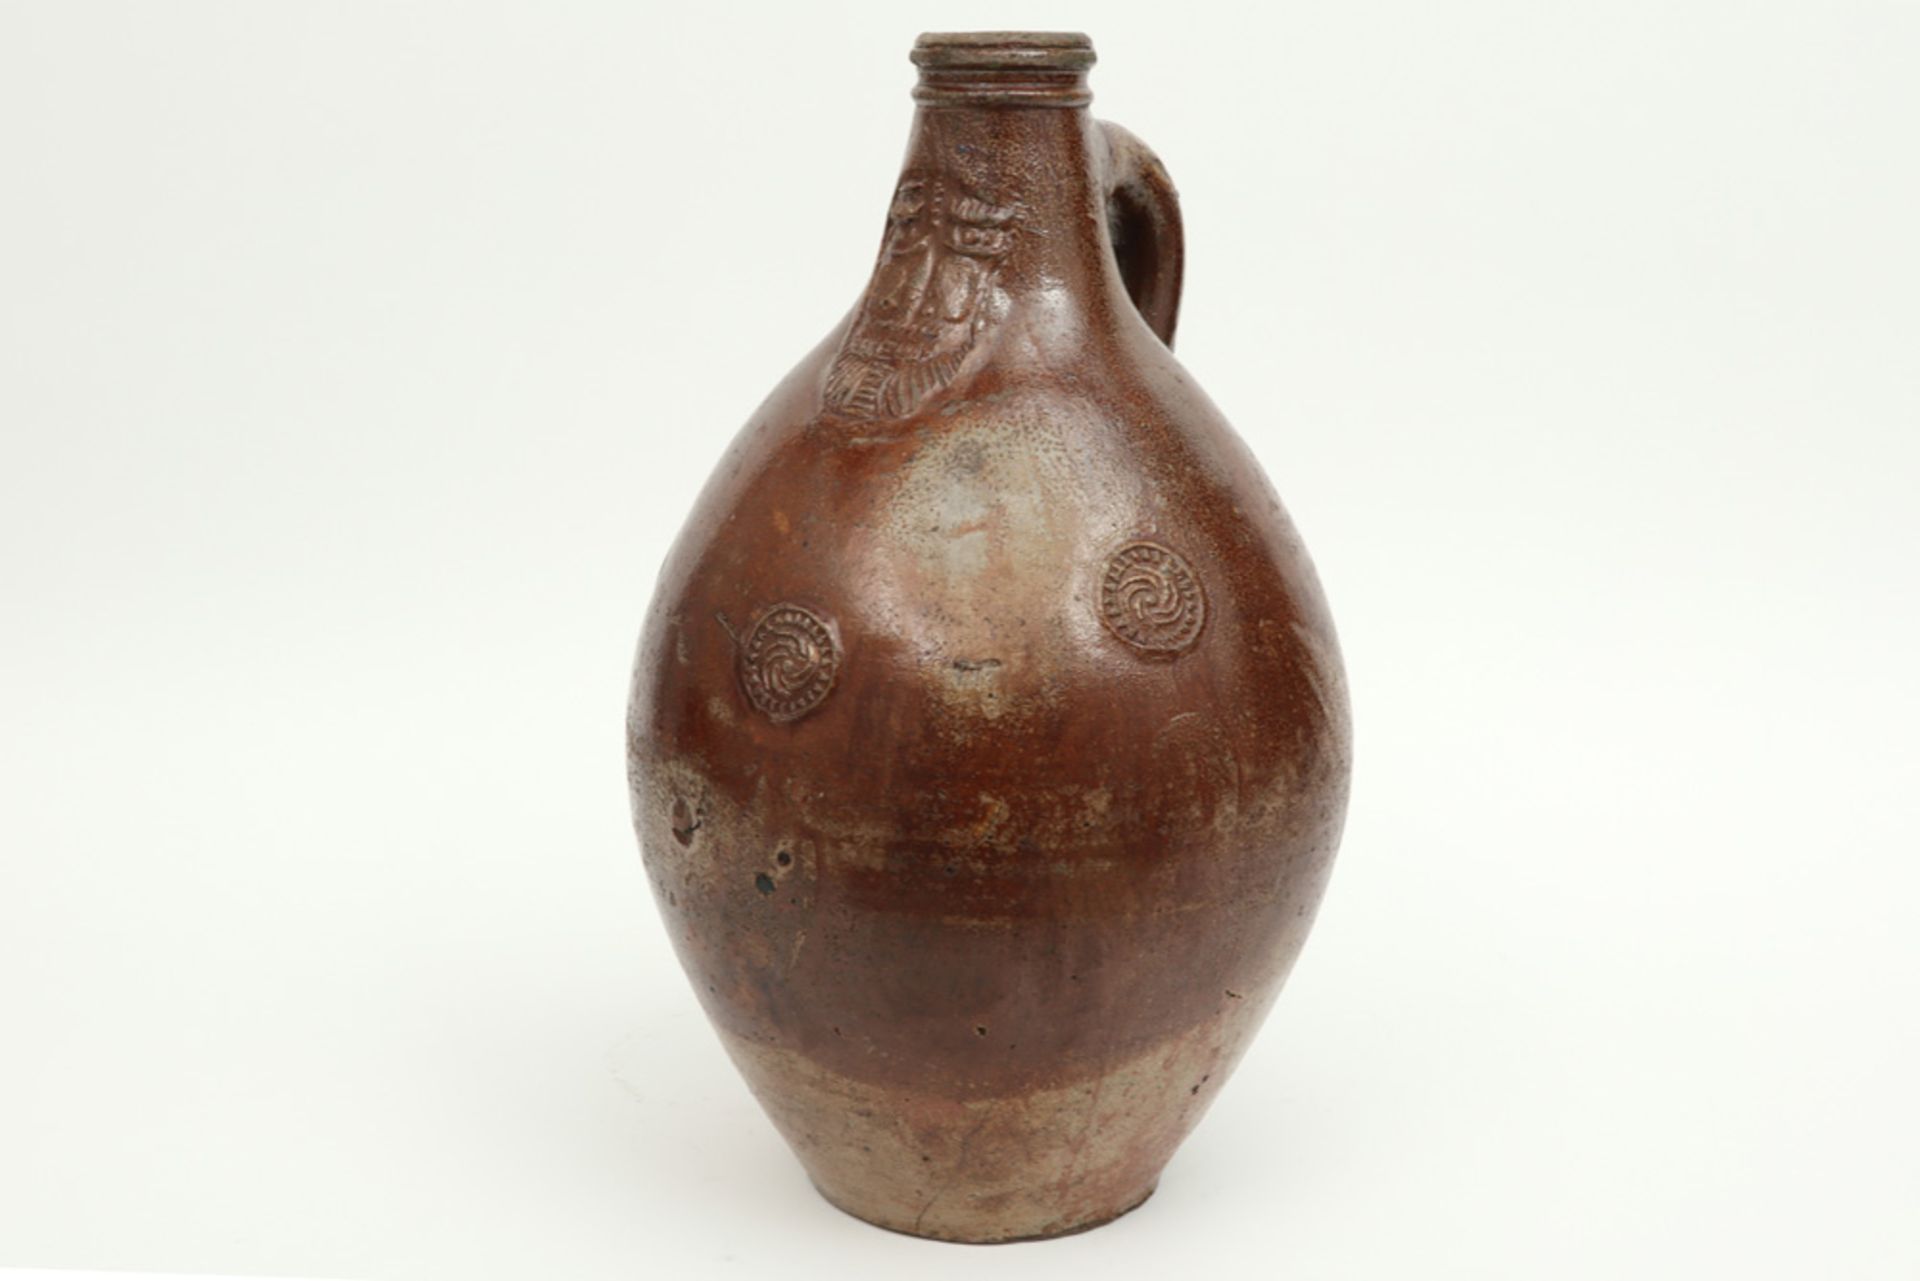 17th Cent. German pitcher, a Barthmann jar, in earthenware - Image 4 of 7